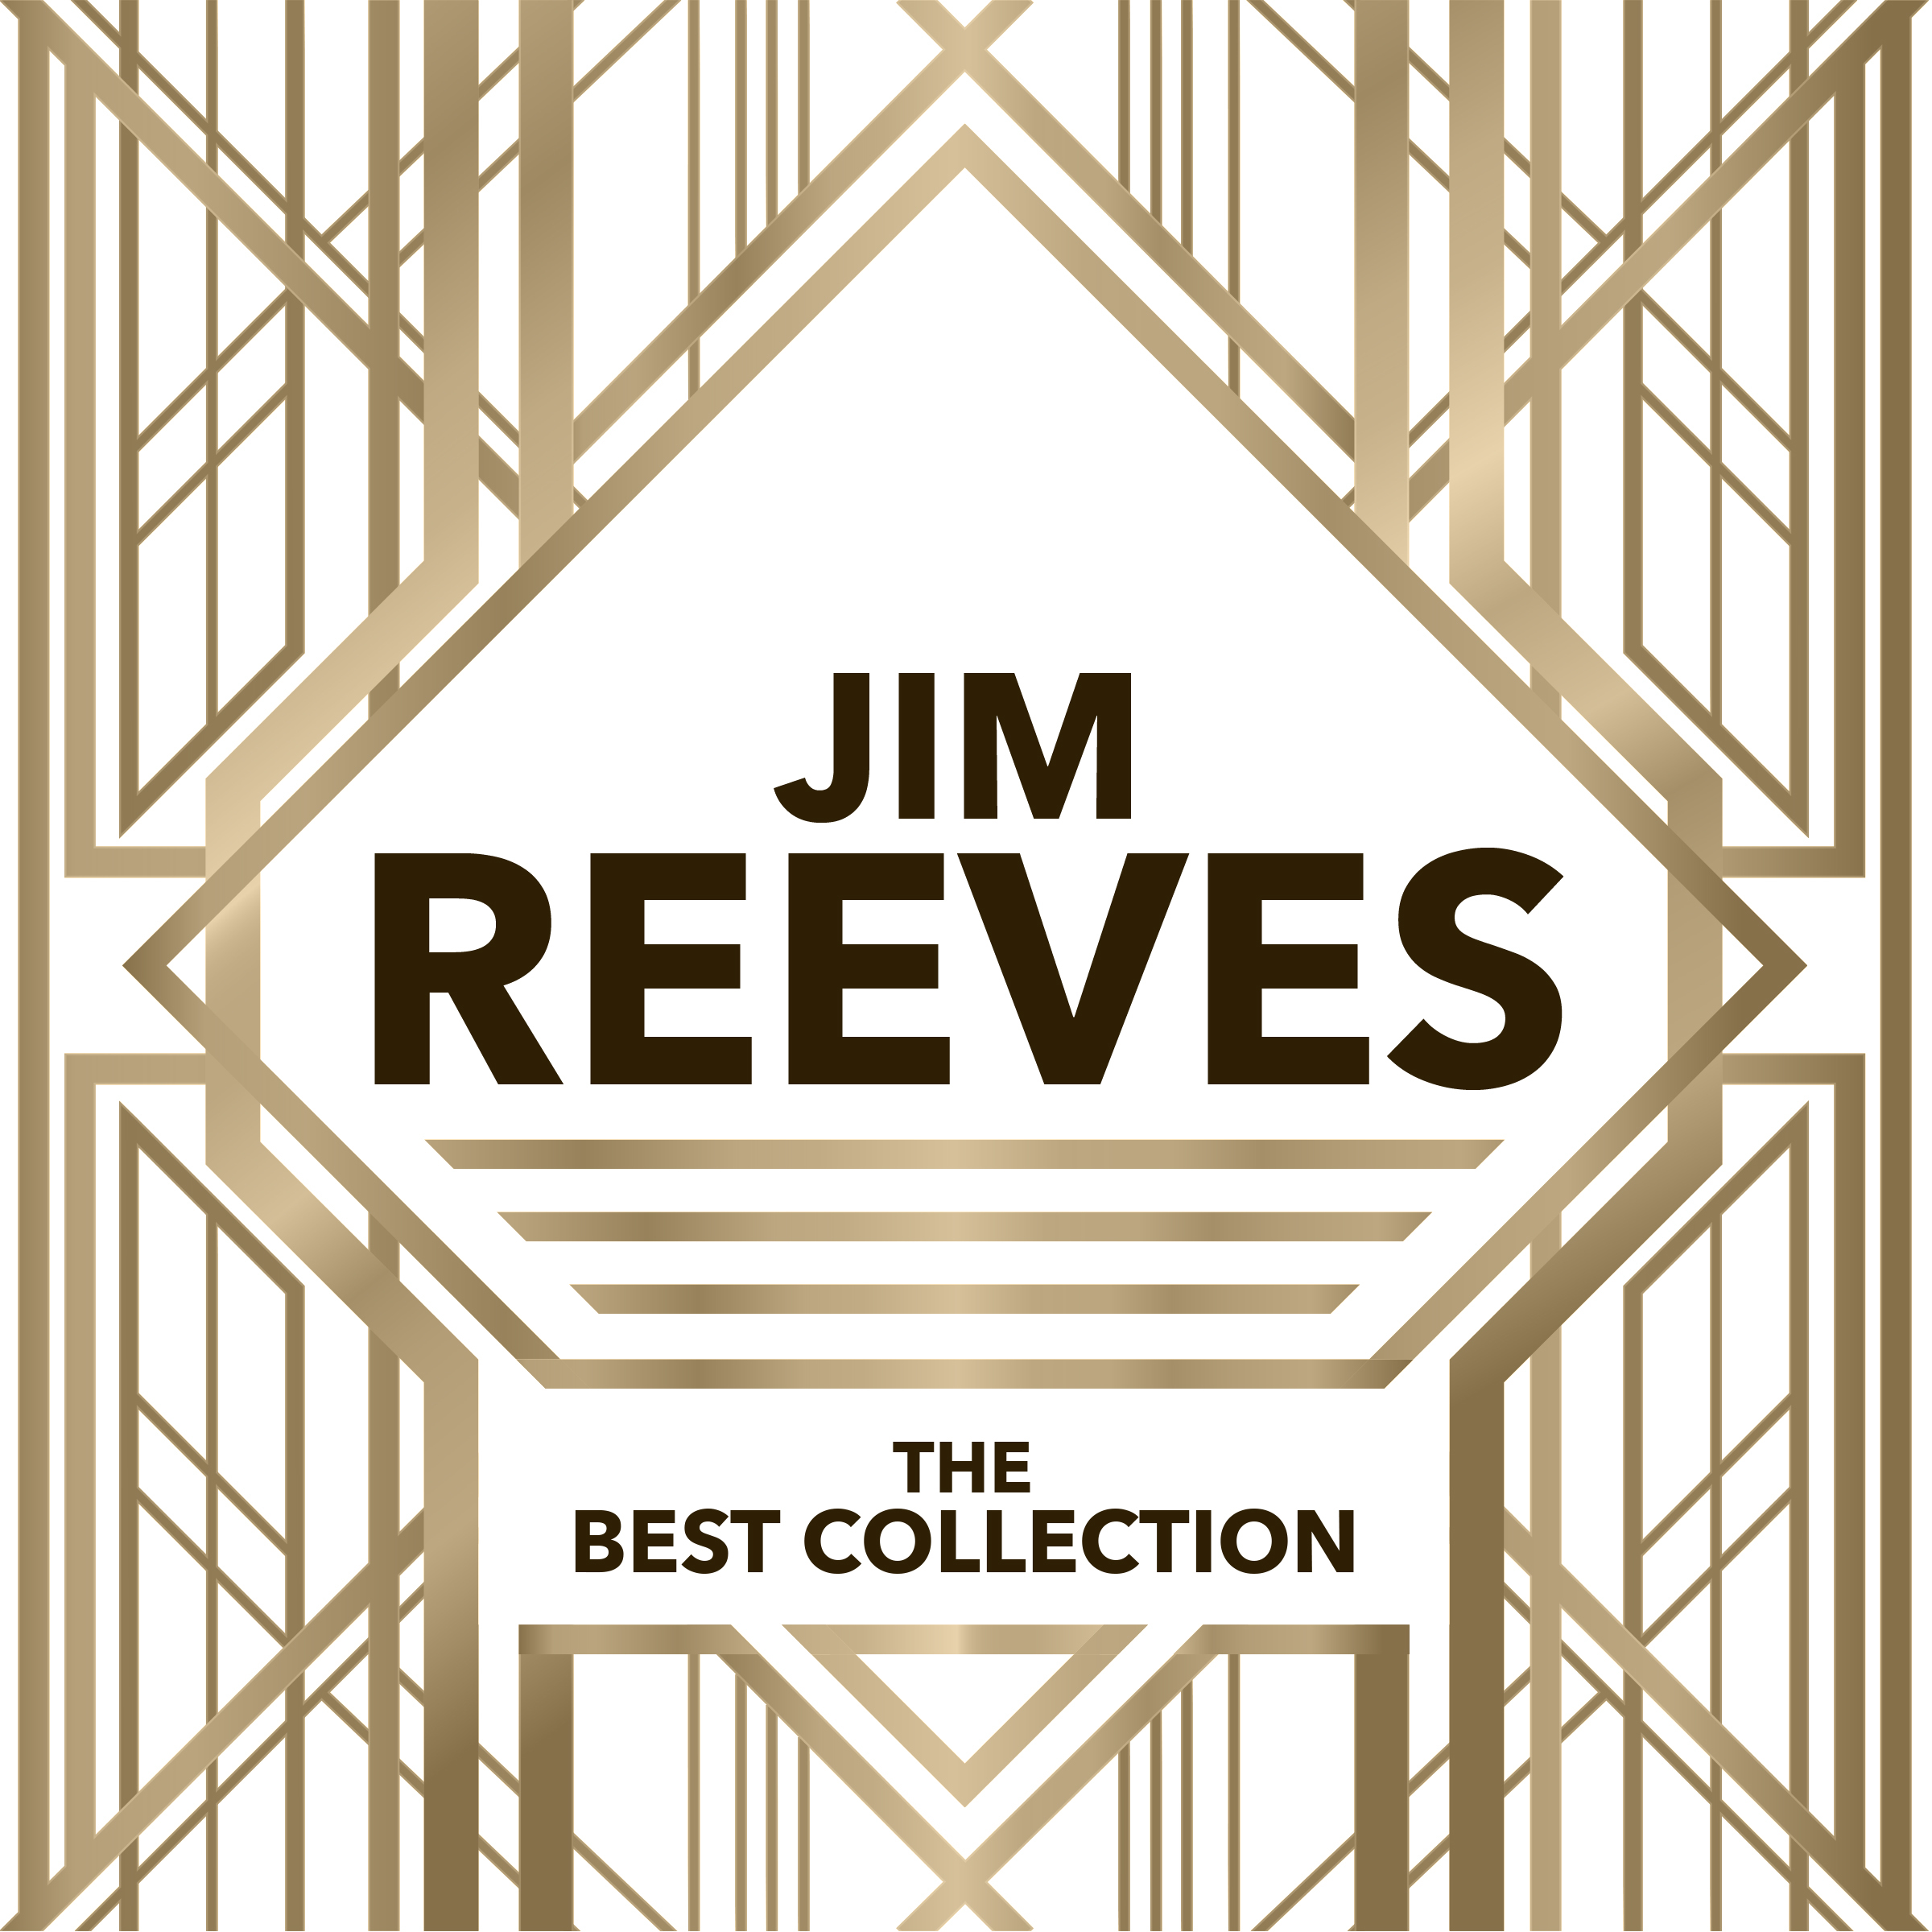 Jim Reeves - The Best Collection